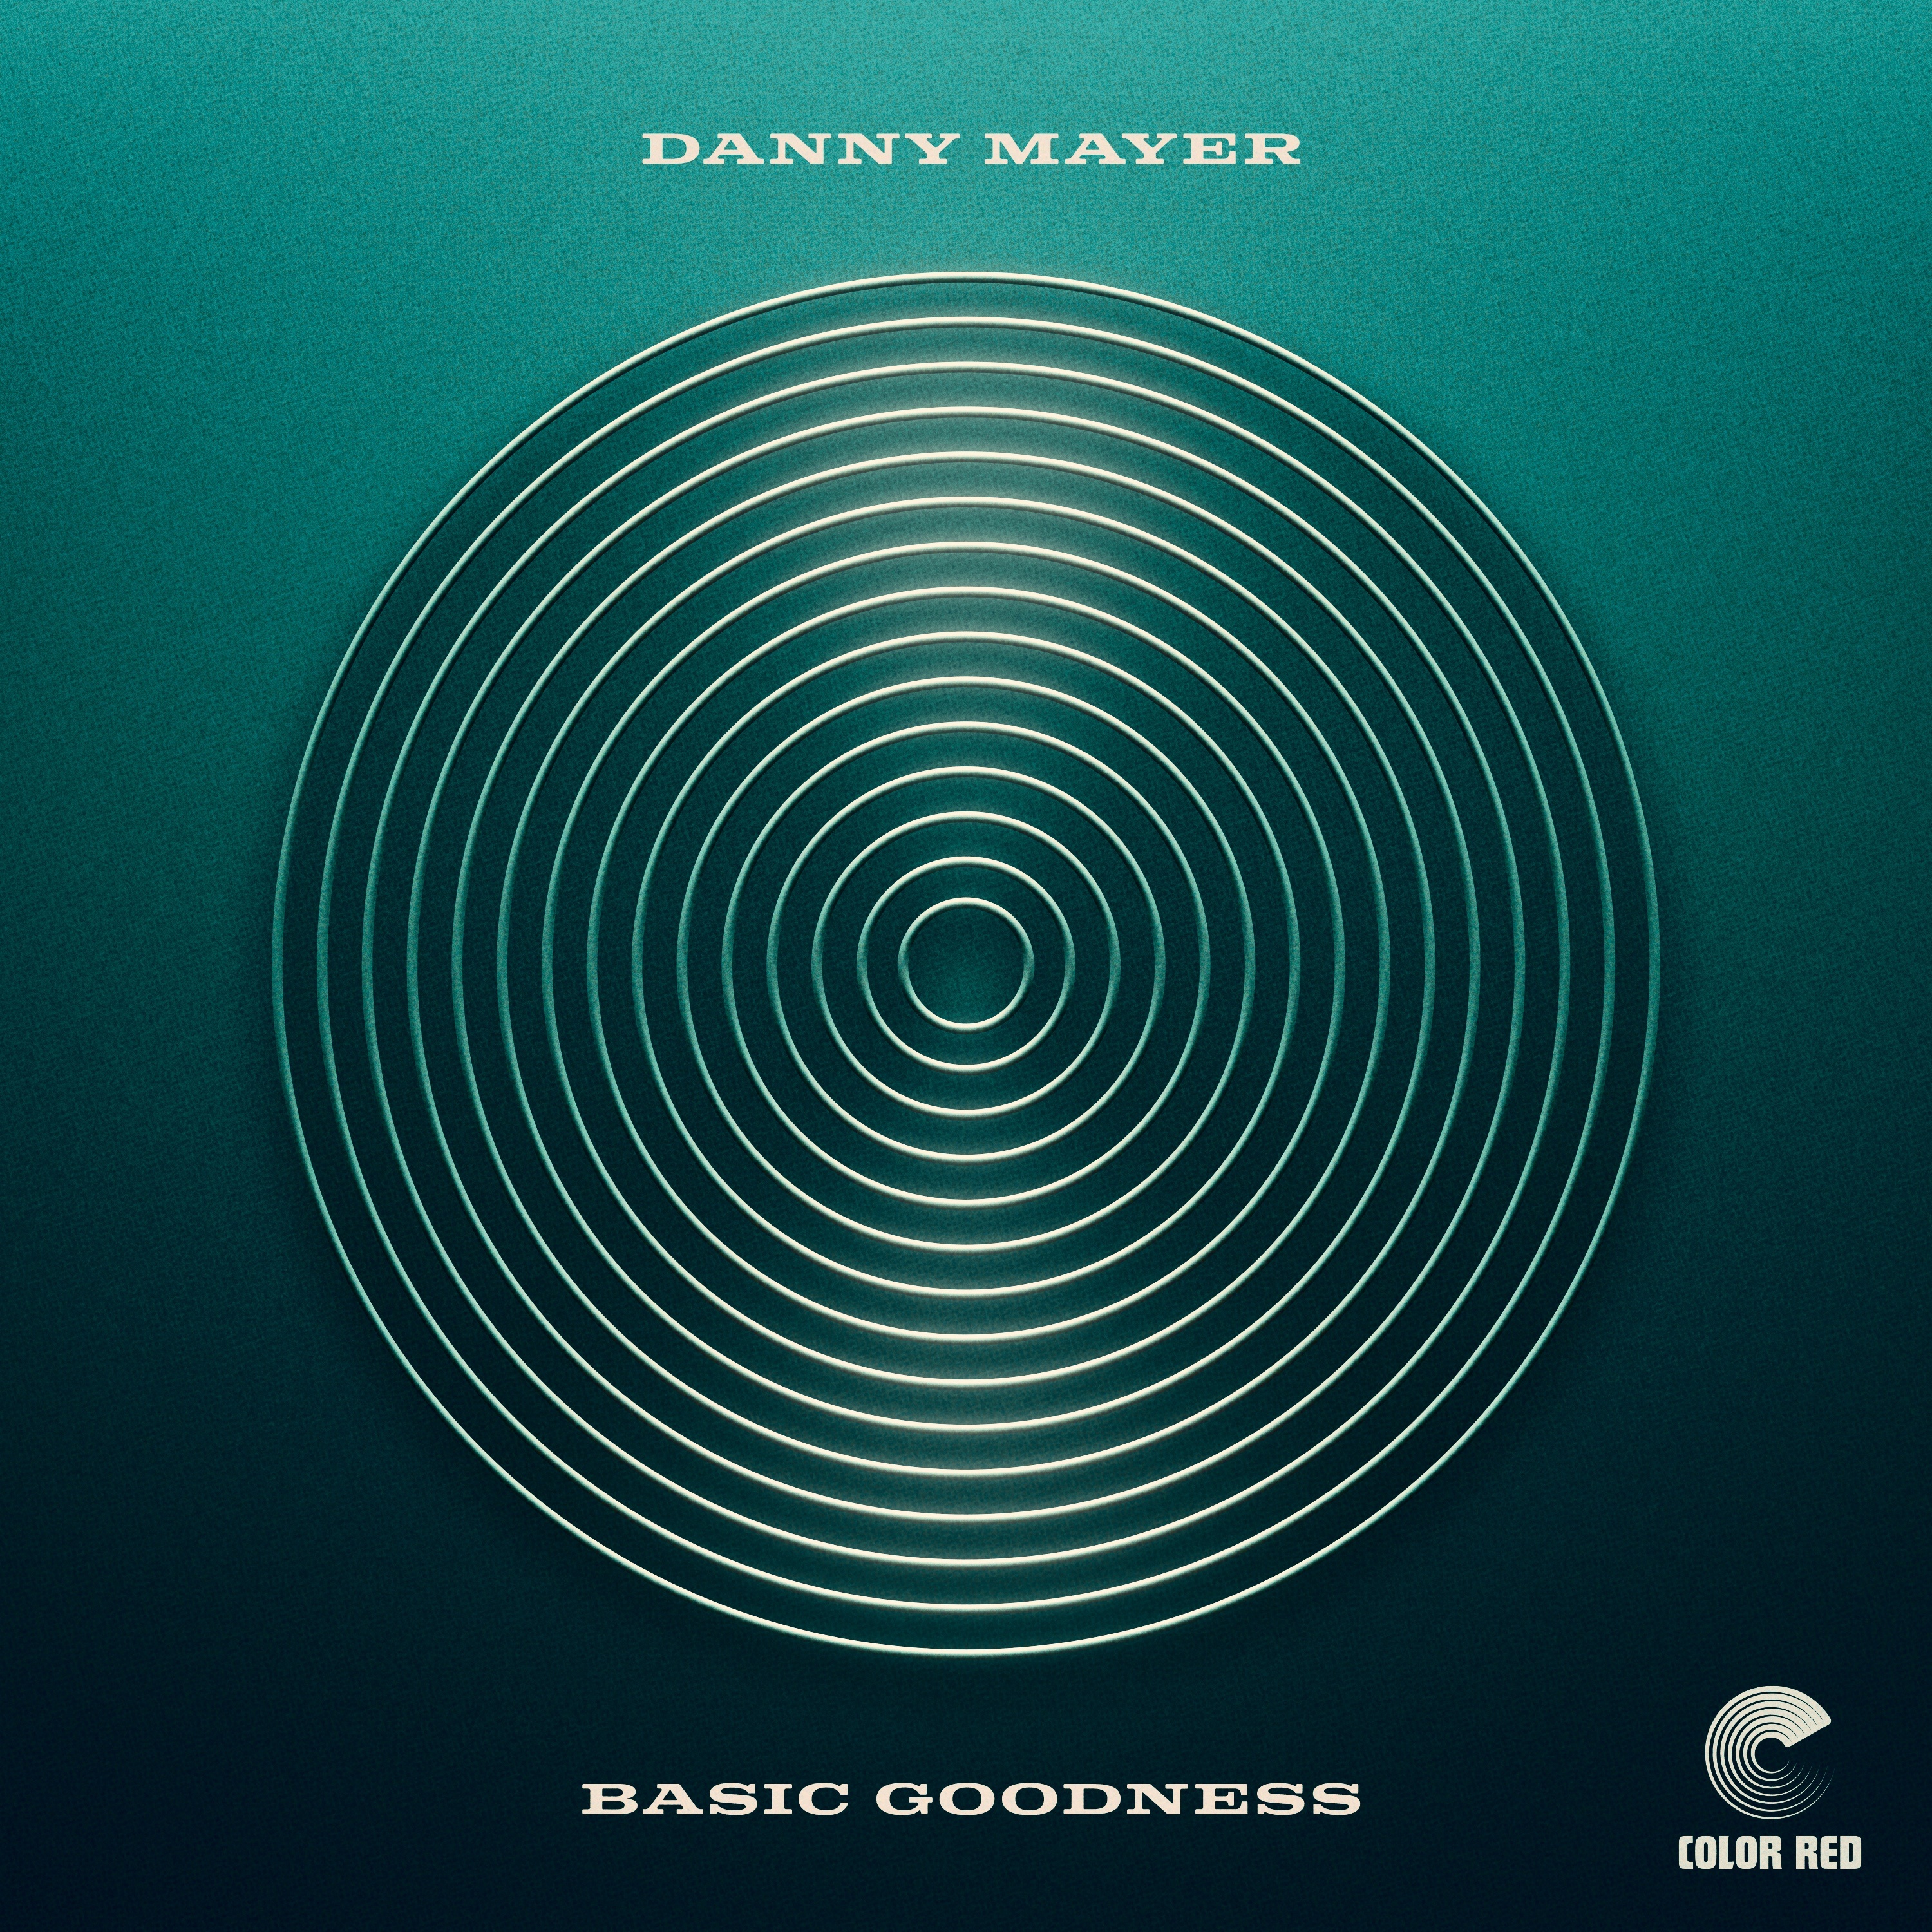 DANNY MAYER TO RELEASE DEBUT SOLO SINGLE "BASIC GOODNESS" VIA COLOR RED